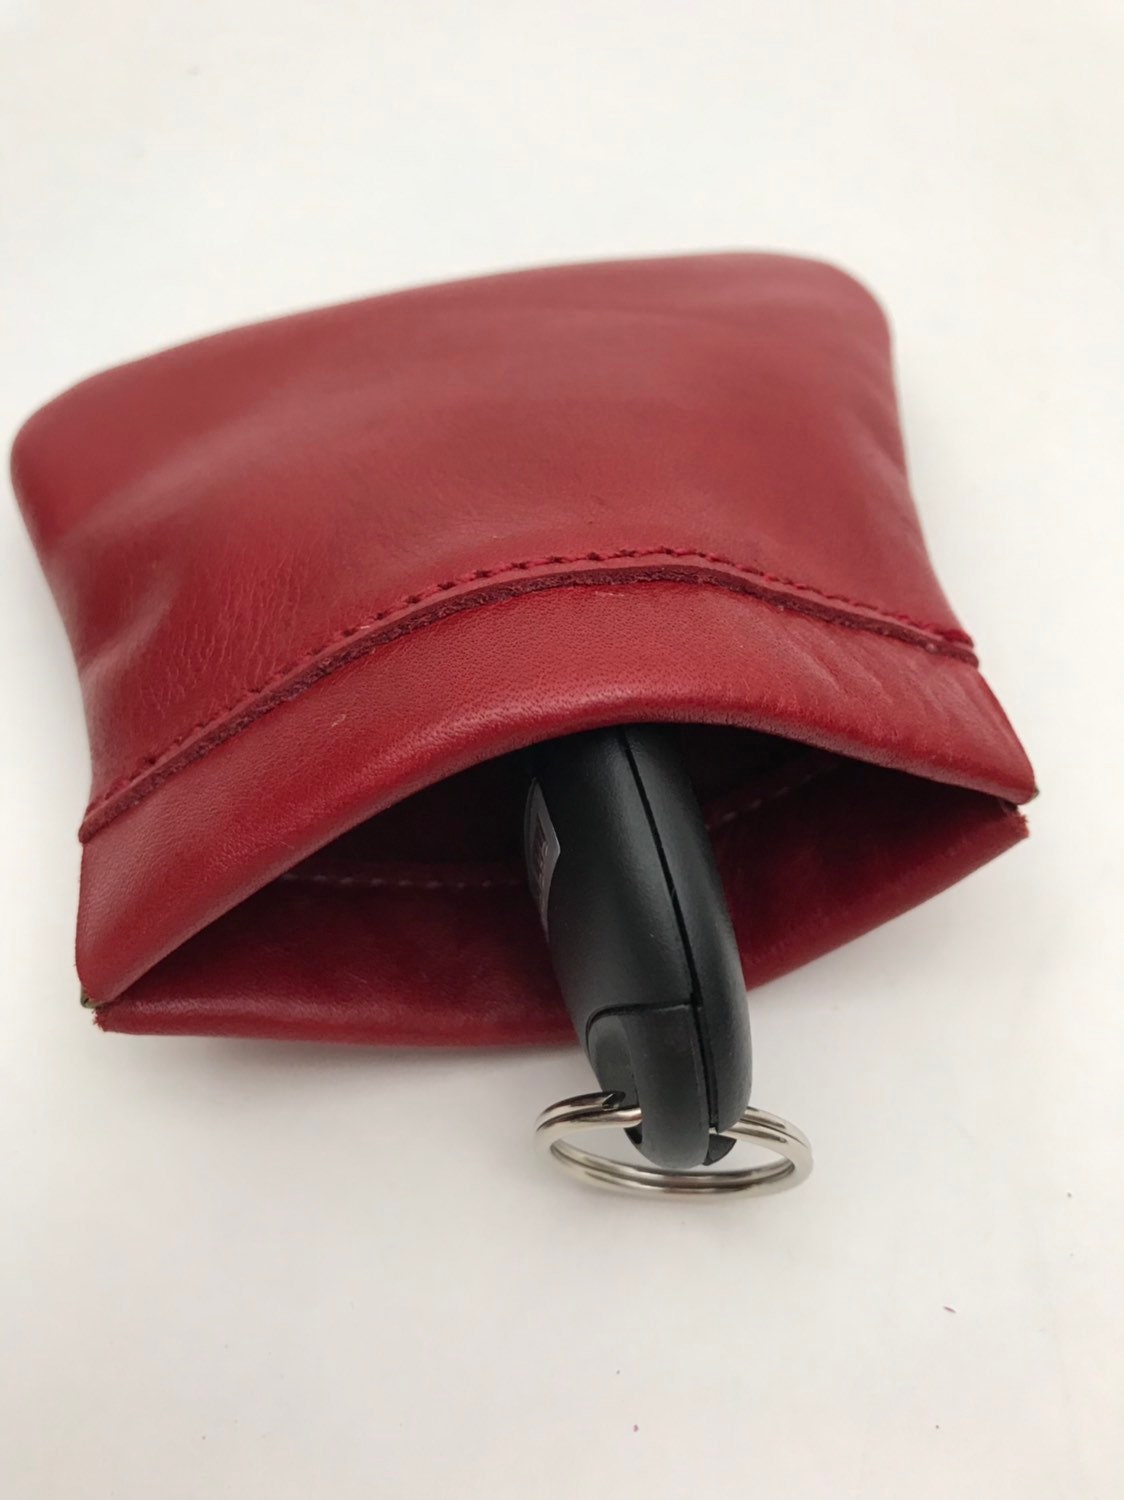 Leather Squeeze Coin Purse Pouch Change Holder For Men & Woman